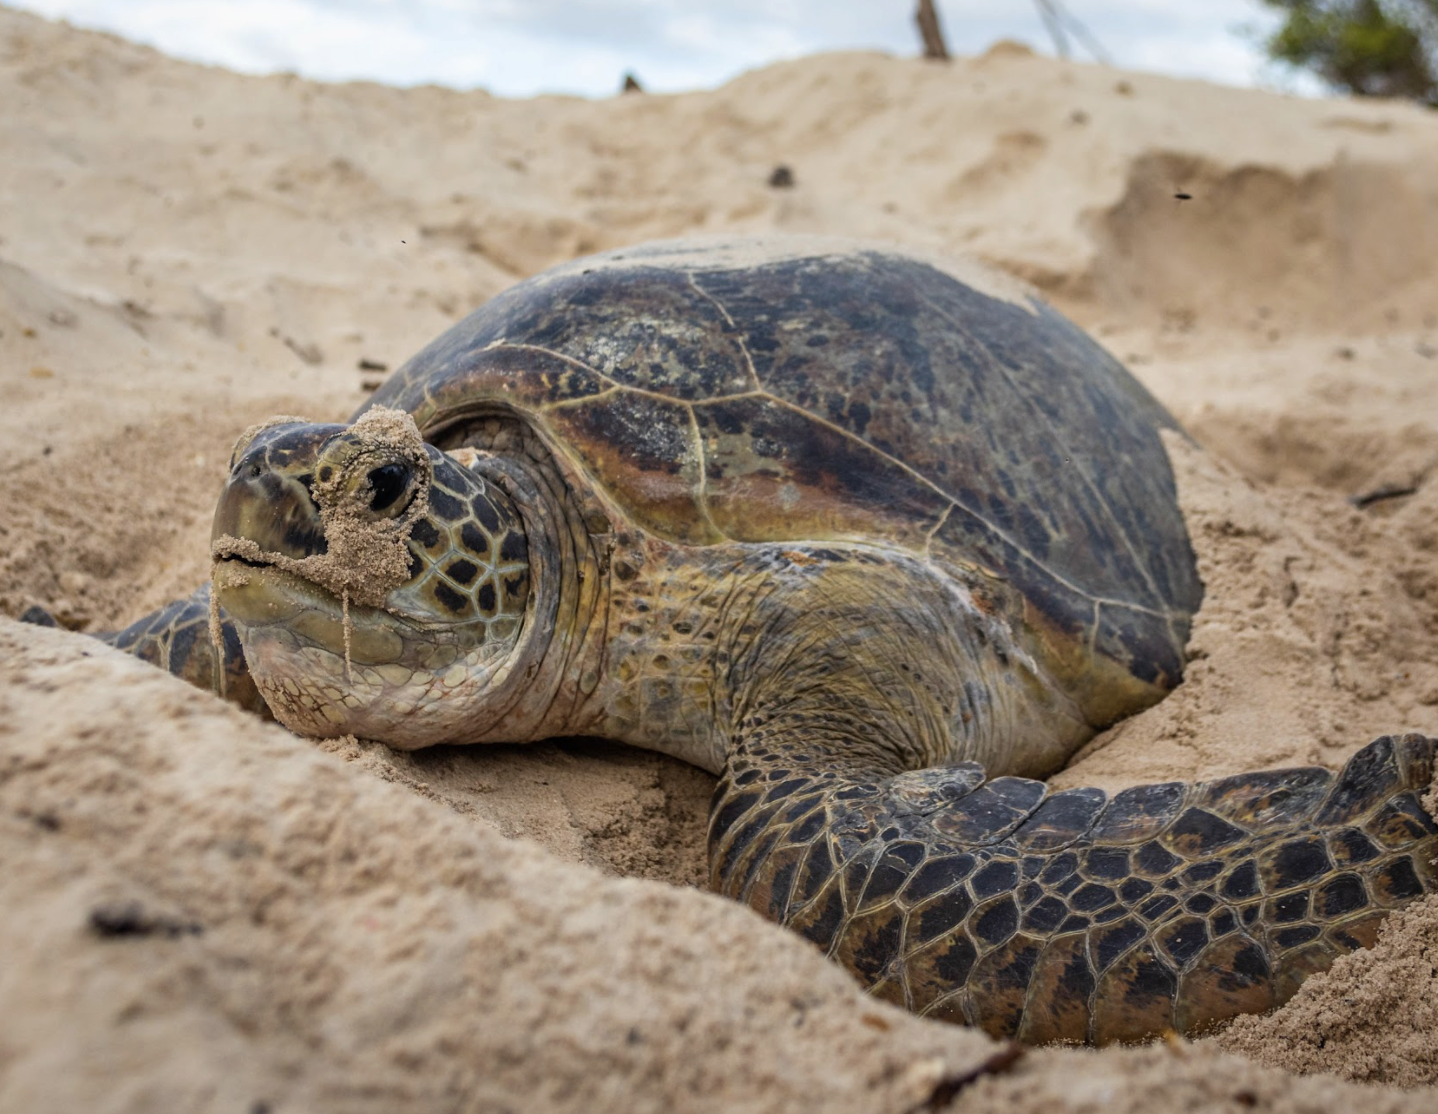 Endangered green turtles are bouncing back in the Seychelles